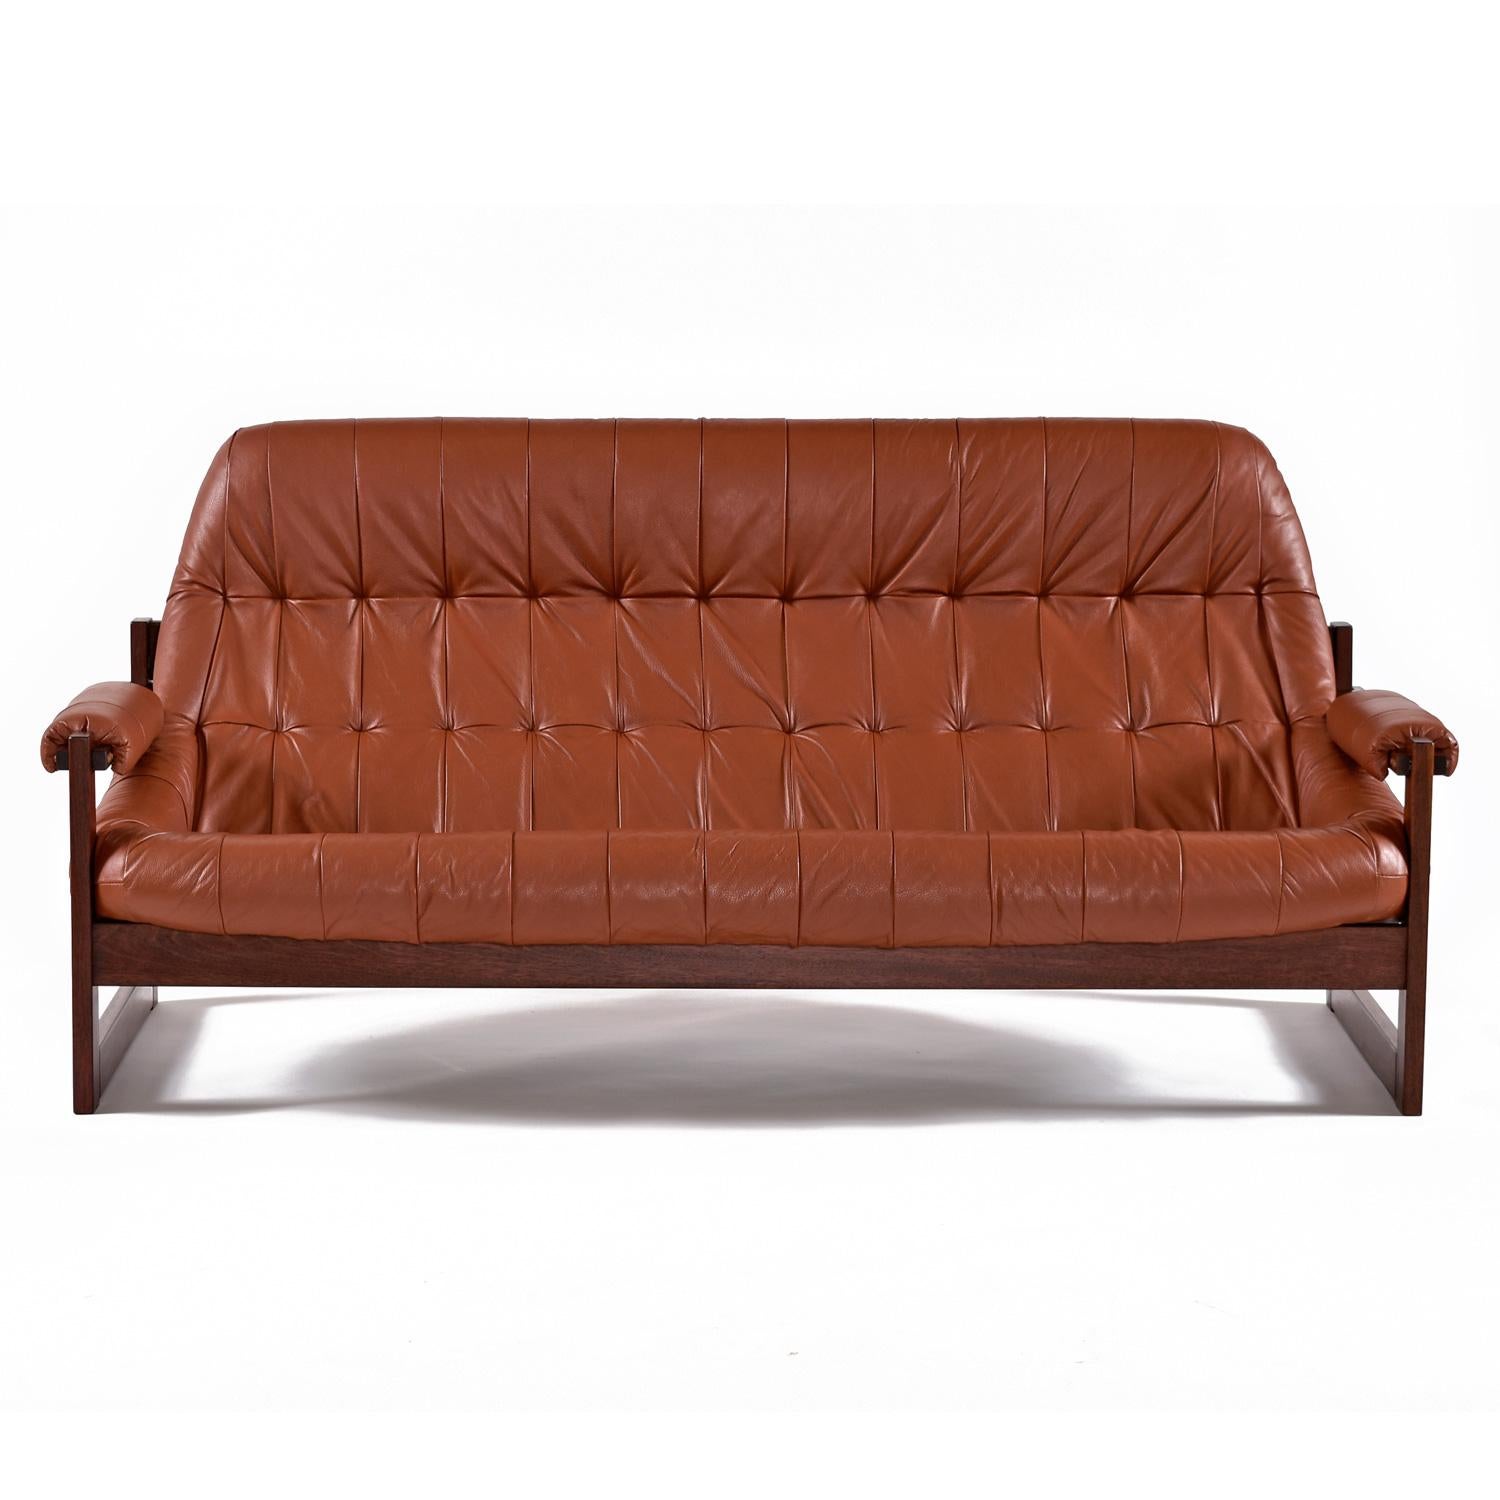 We've had several Percival Lafer sofas and chairs over the years, and this MP-163 